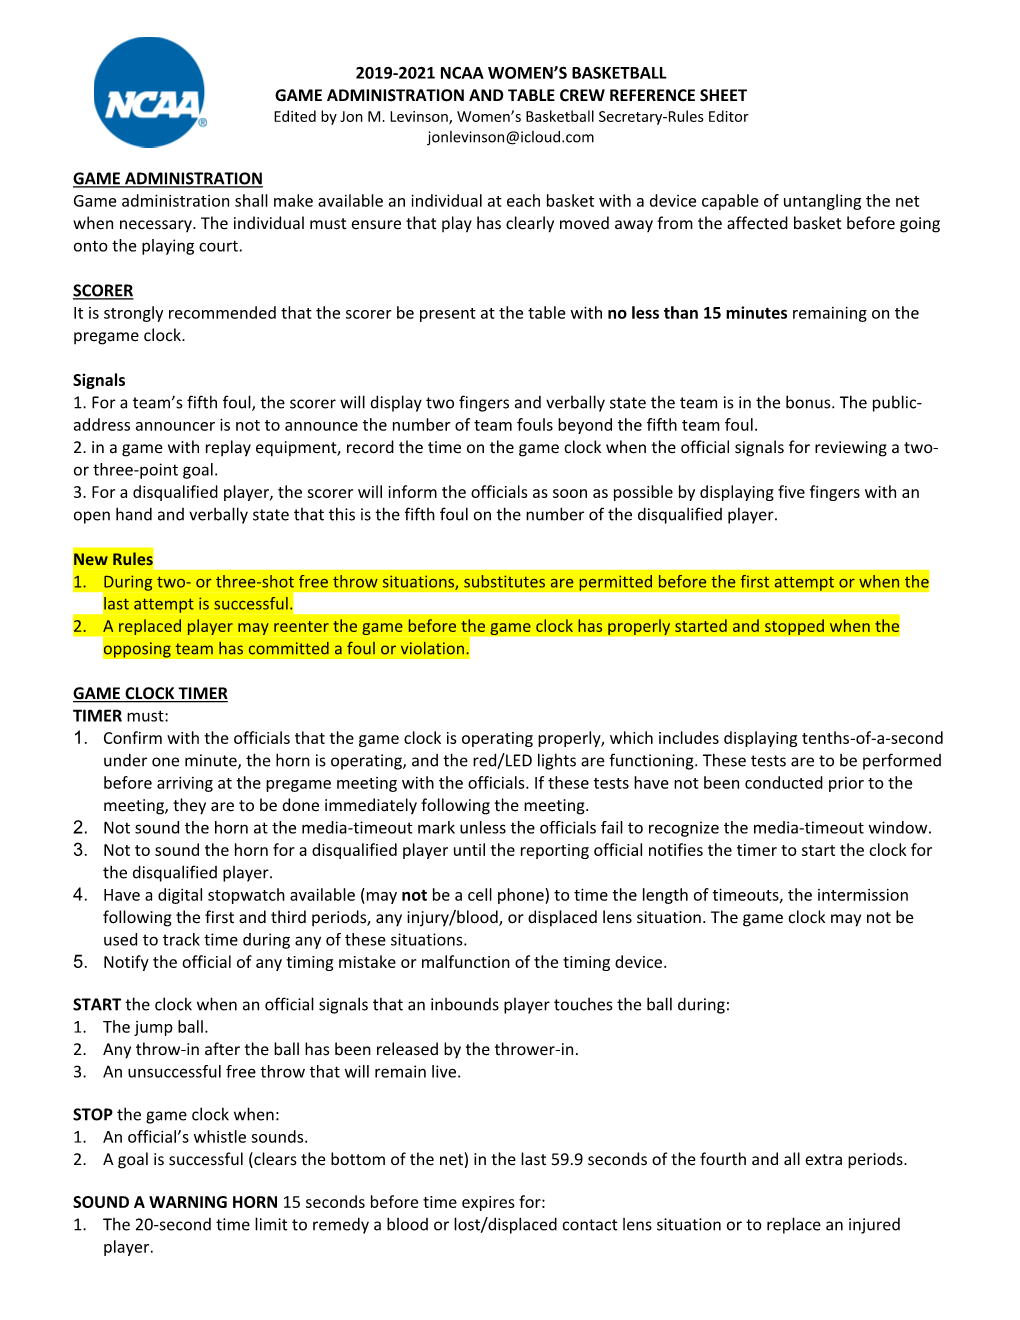 2019-2021 NCAA WOMEN's BASKETBALL GAME ADMINISTRATION and TABLE CREW REFERENCE SHEET GAME ADMINISTRATION Game Administration